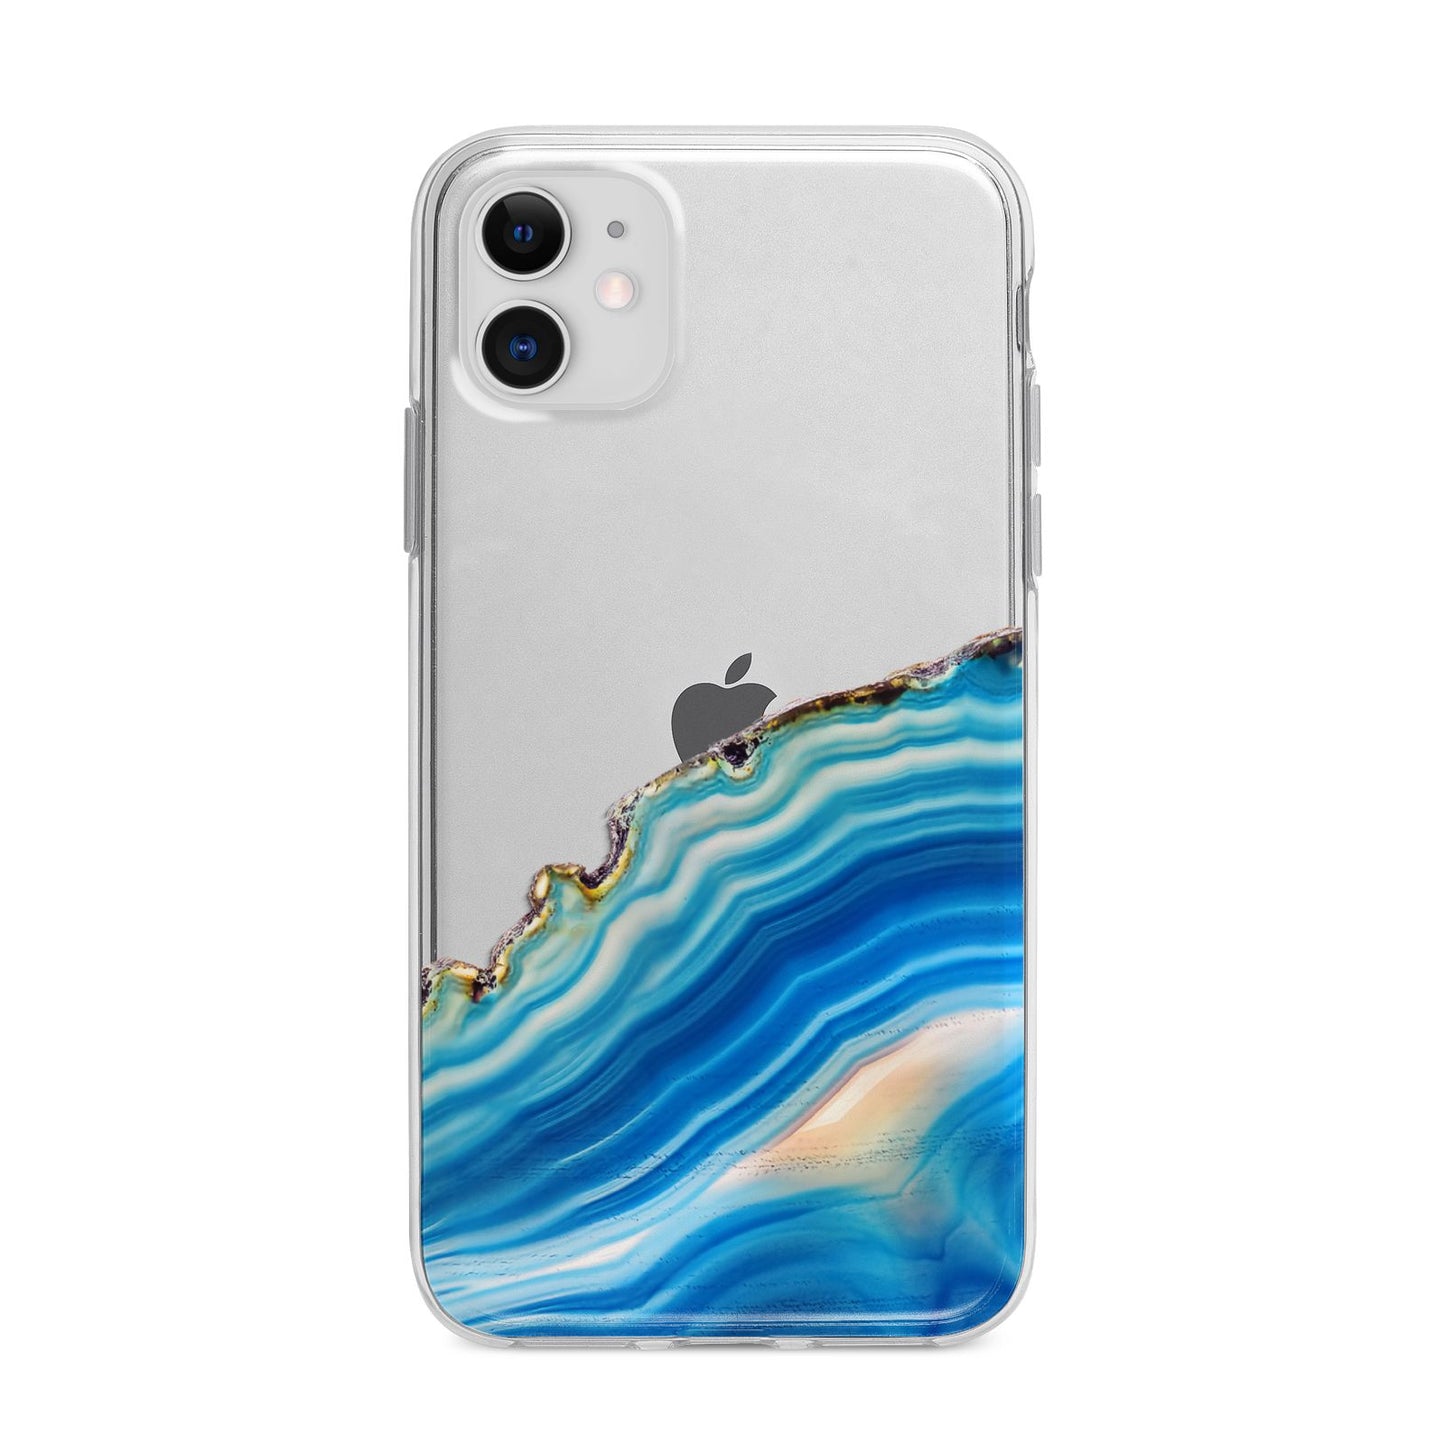 Agate Pale Blue and Bright Blue Apple iPhone 11 in White with Bumper Case